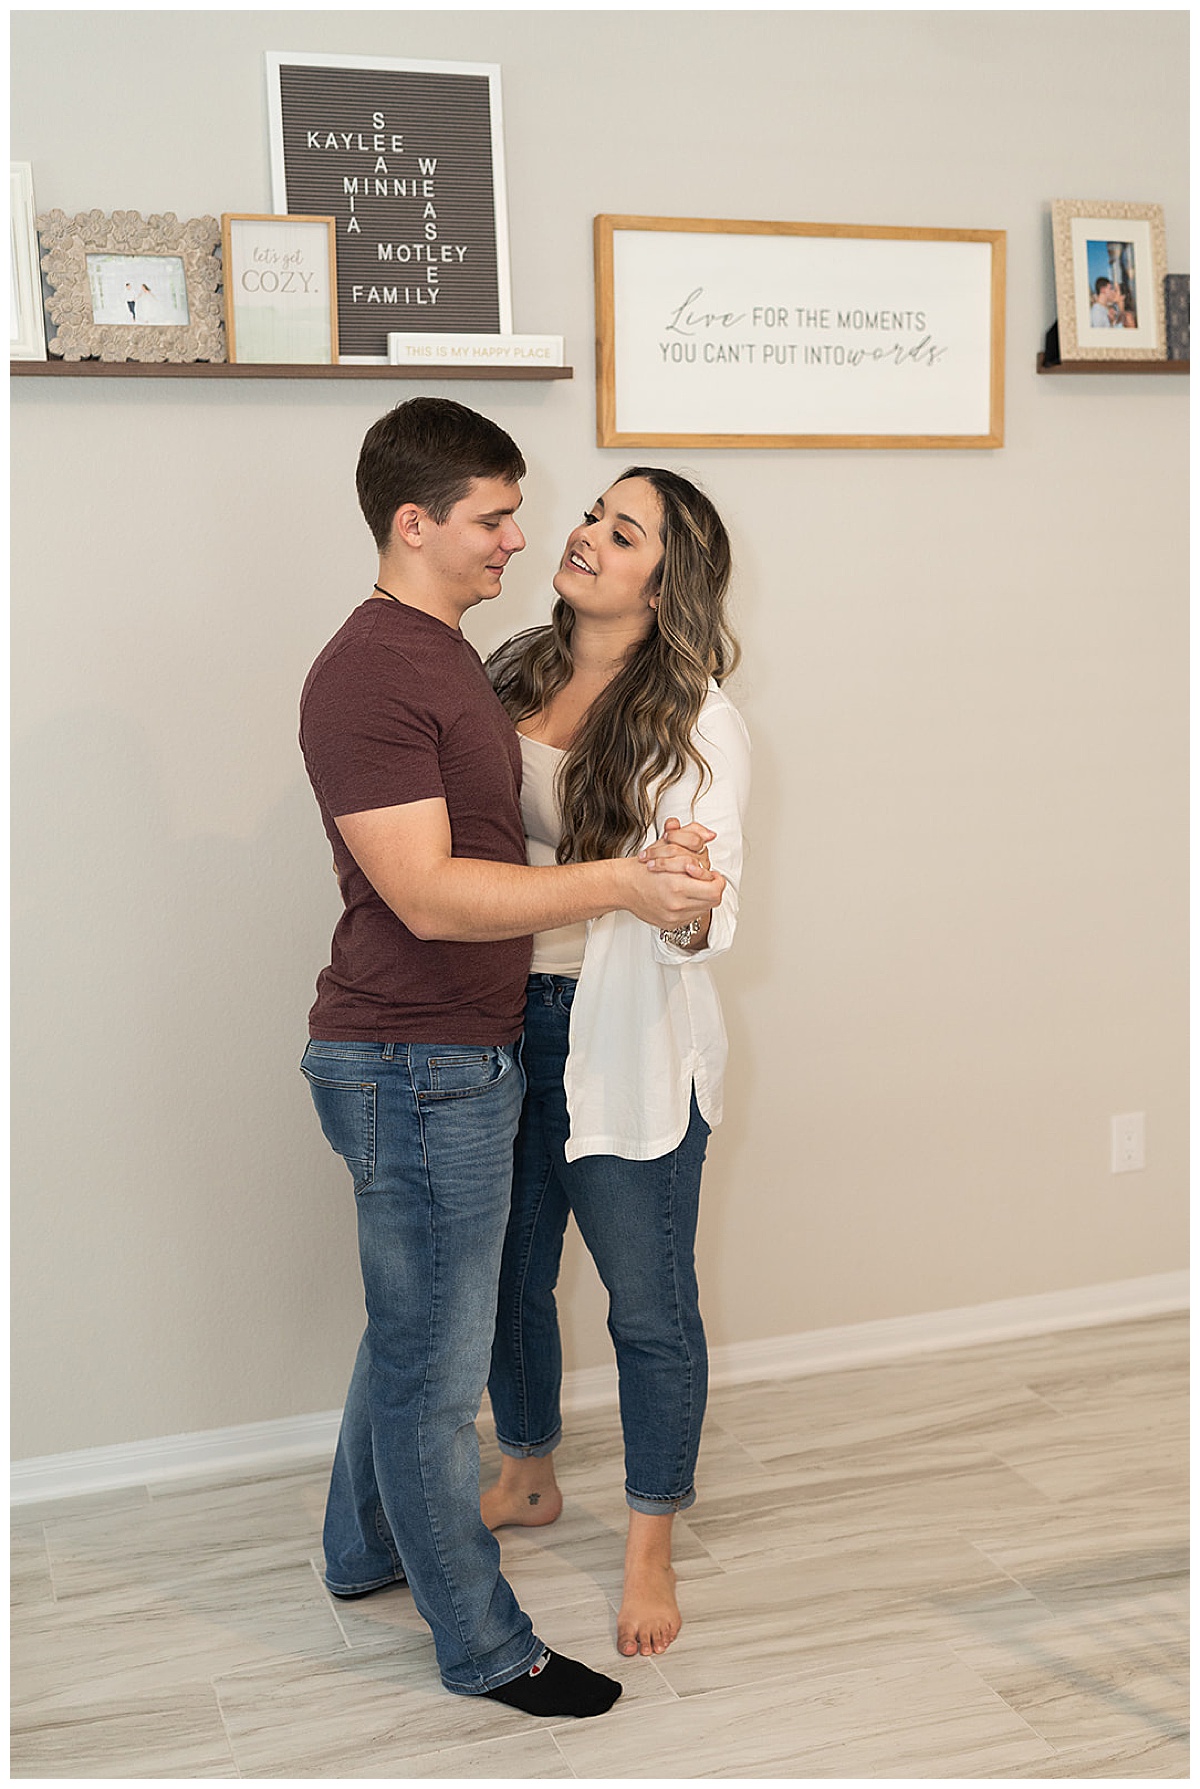 Engaged couple dance together for At-Home Engagement Photos